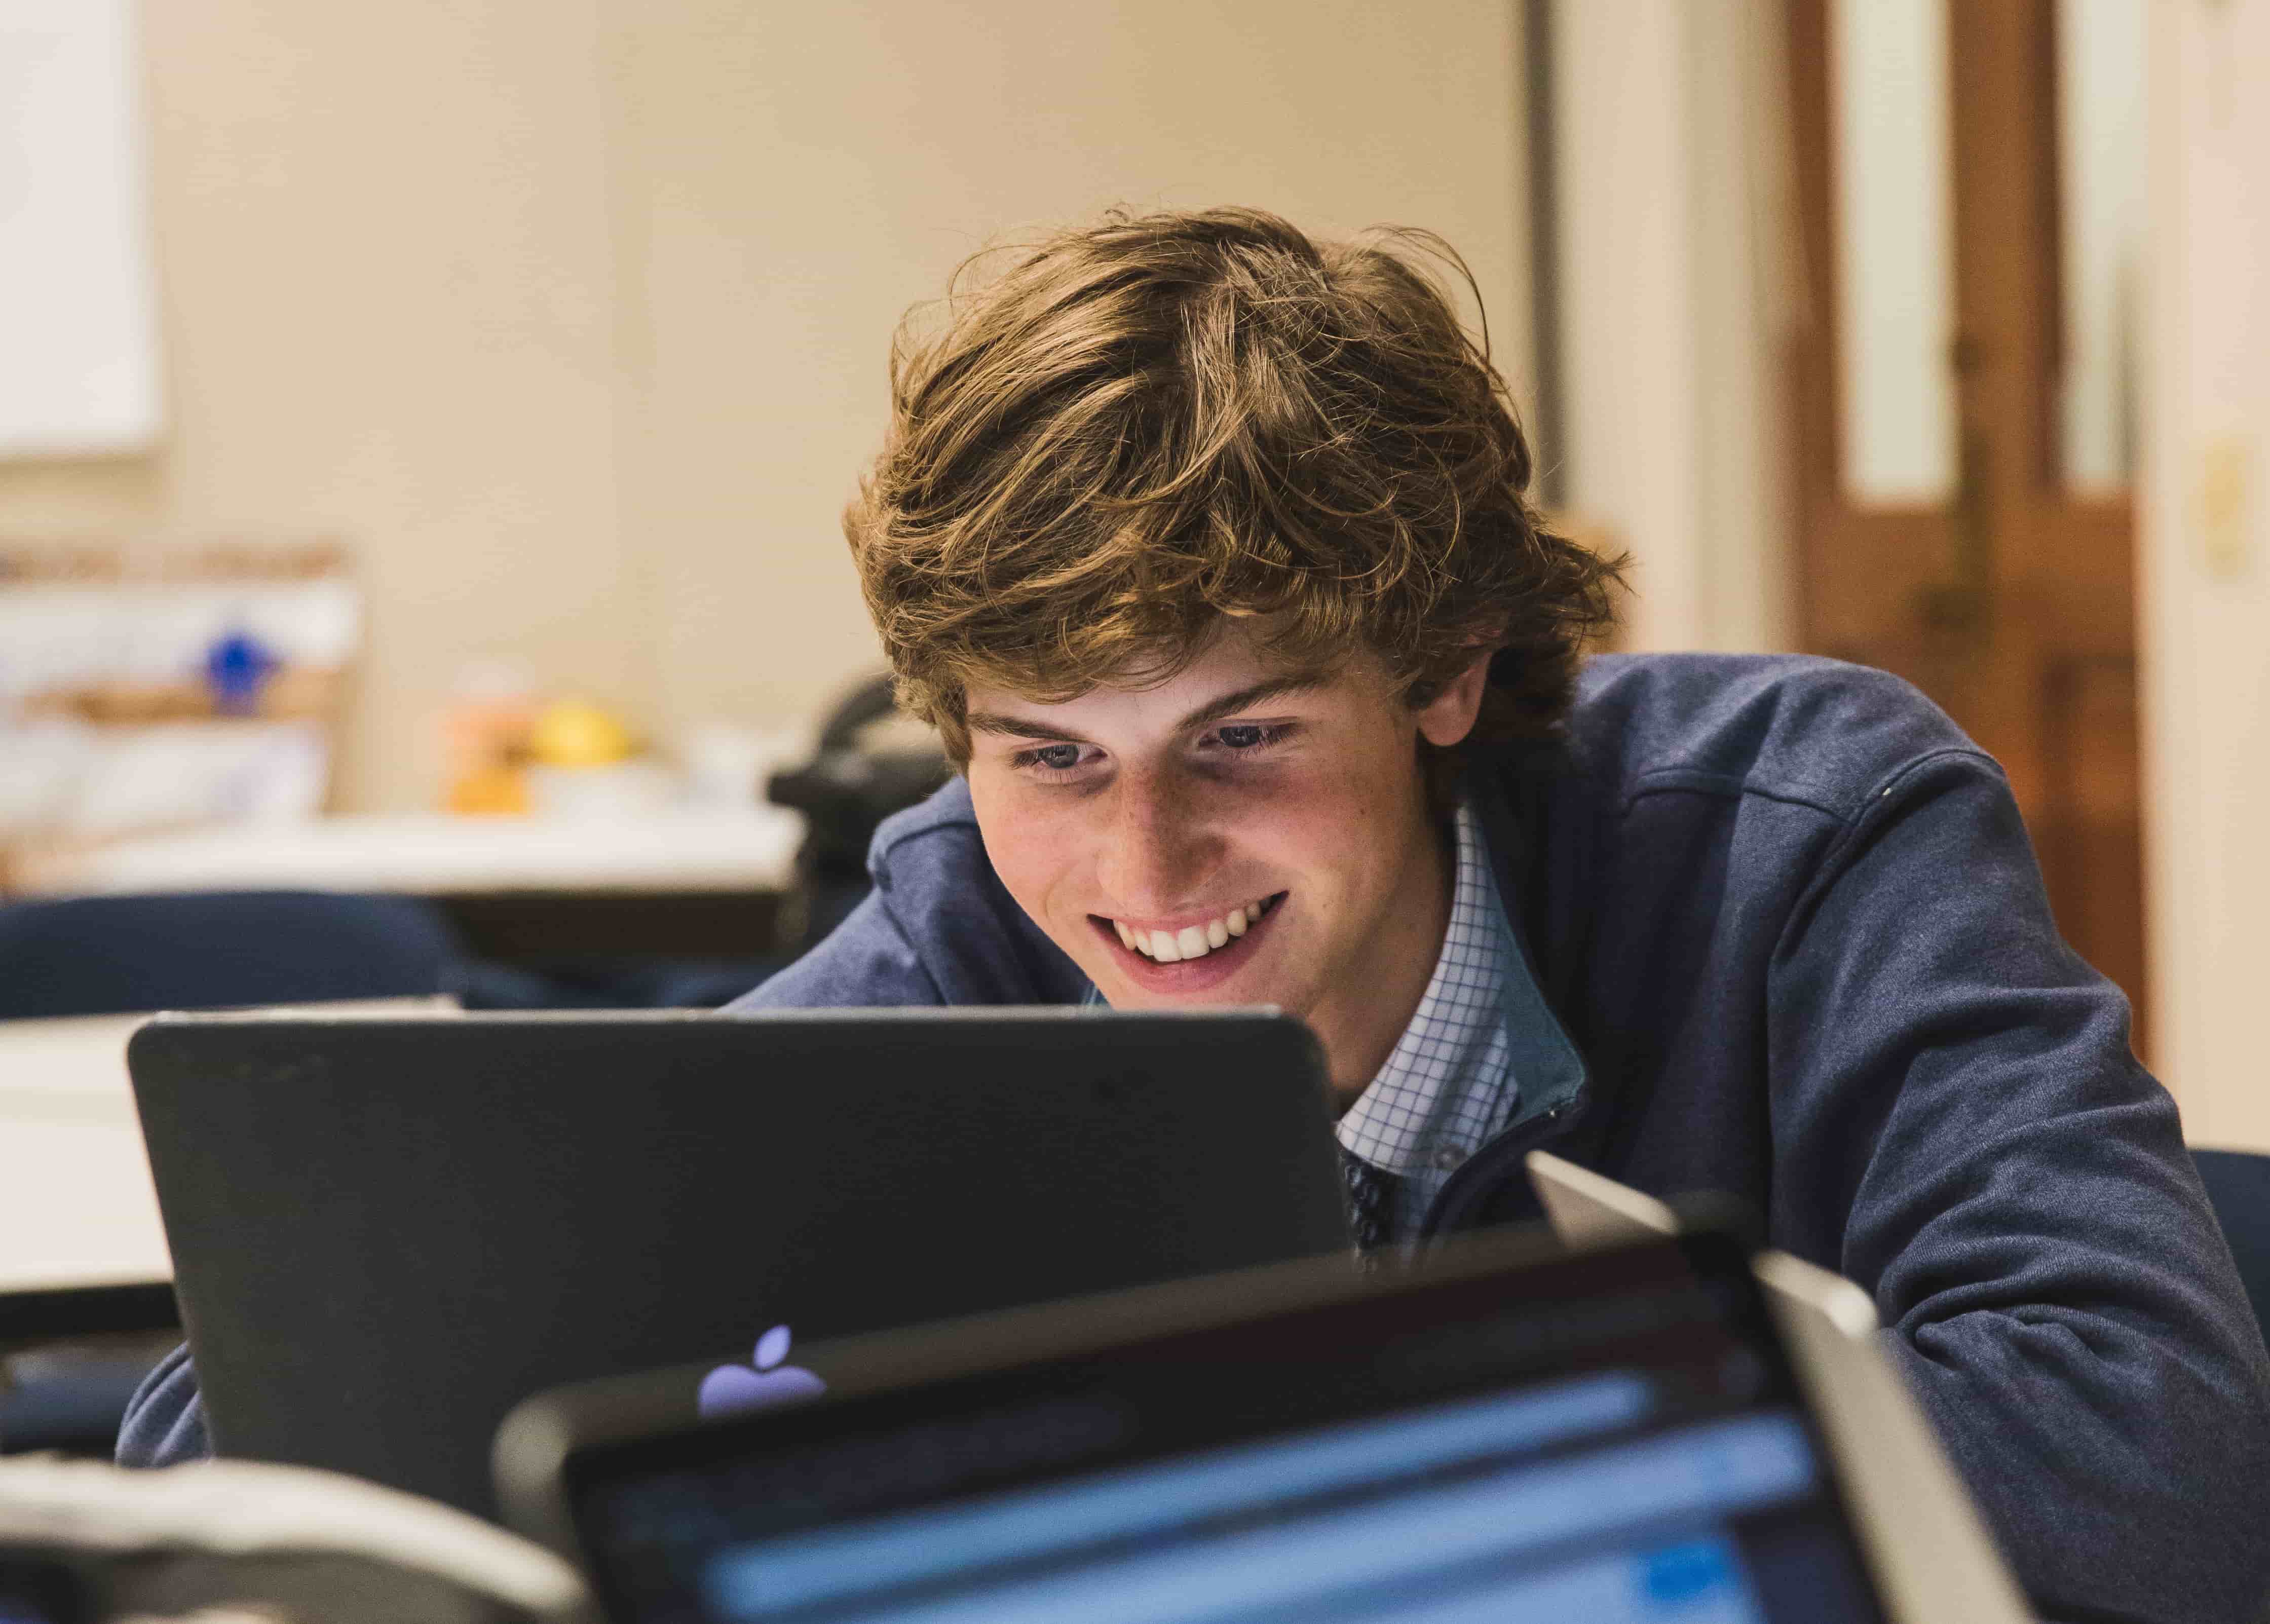 student smiling and doing work on laptop